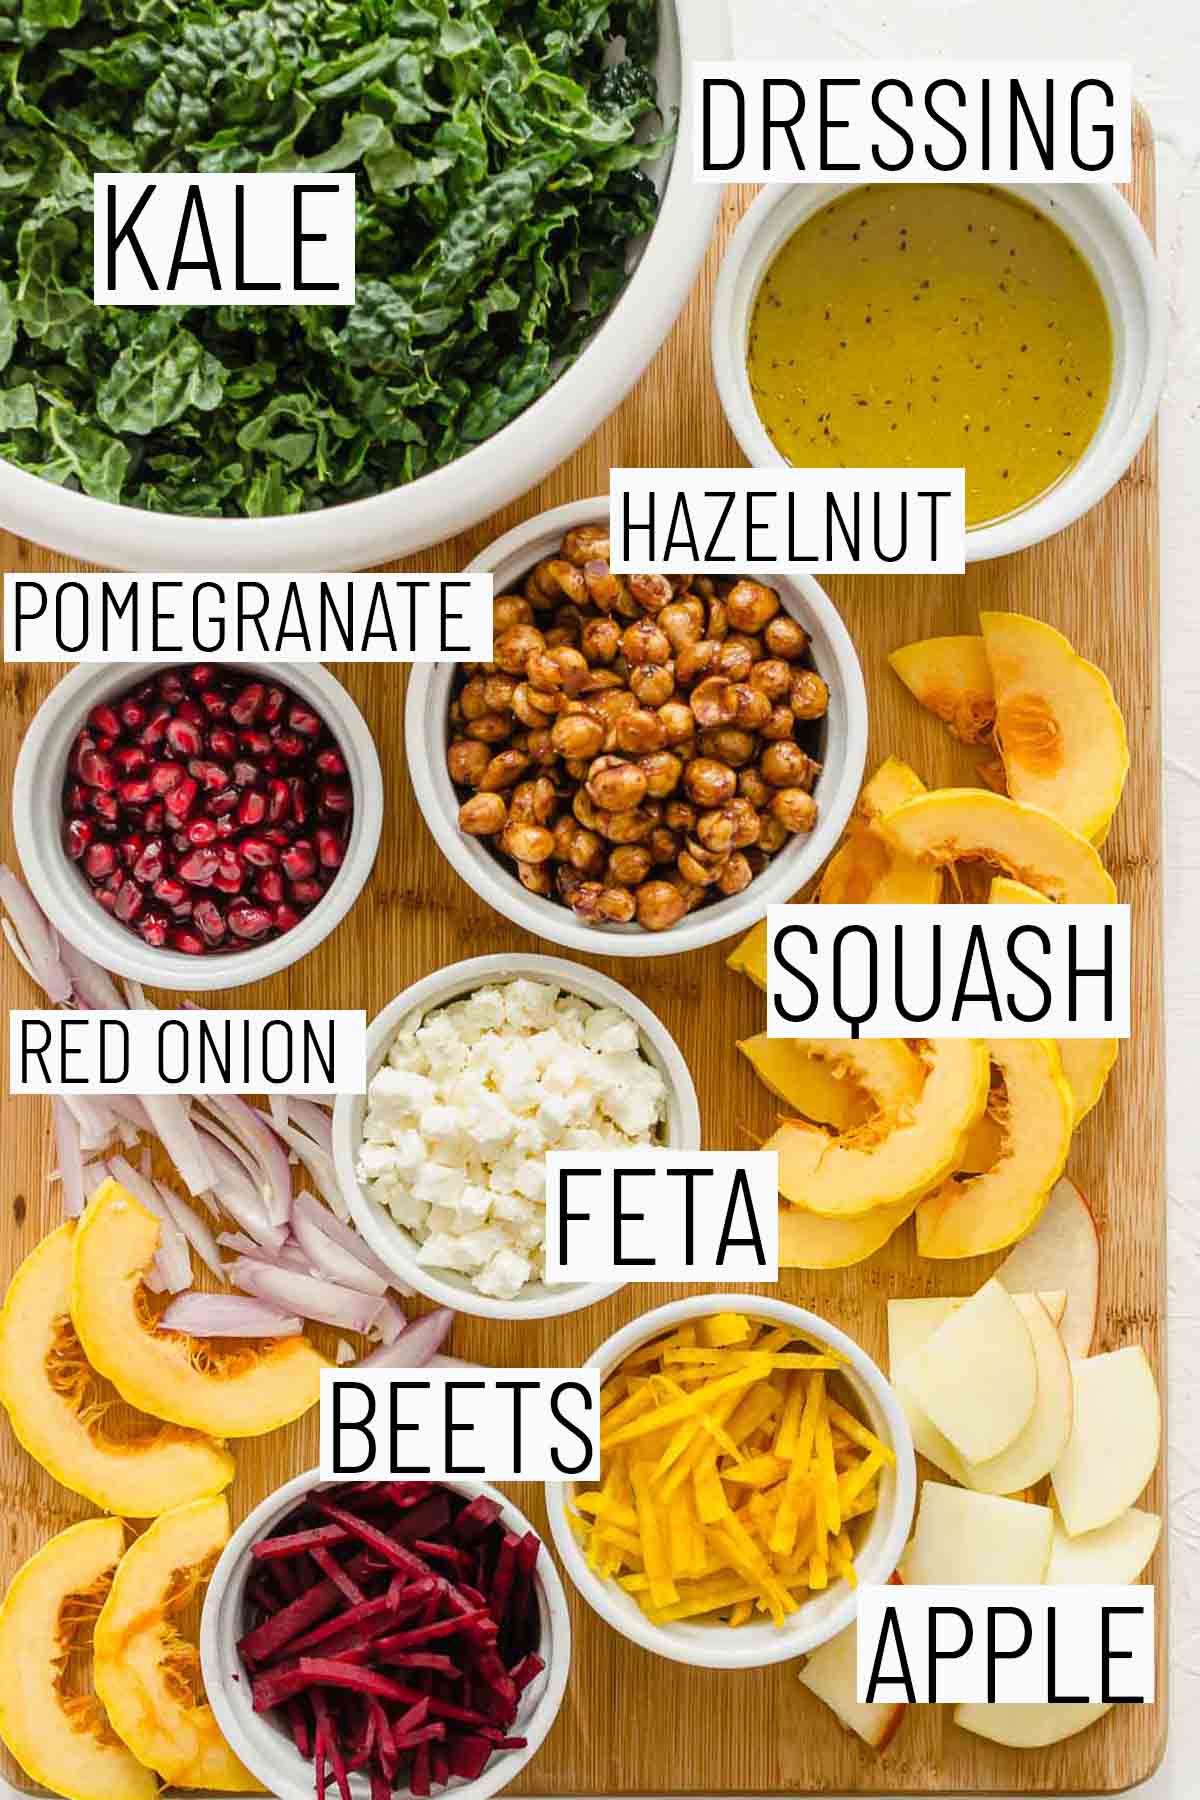 Flat lay image of recipe ingredients including kale, squash, beets, apple, red onion, pomegranate arils, hazelnut, and salad dressing. 